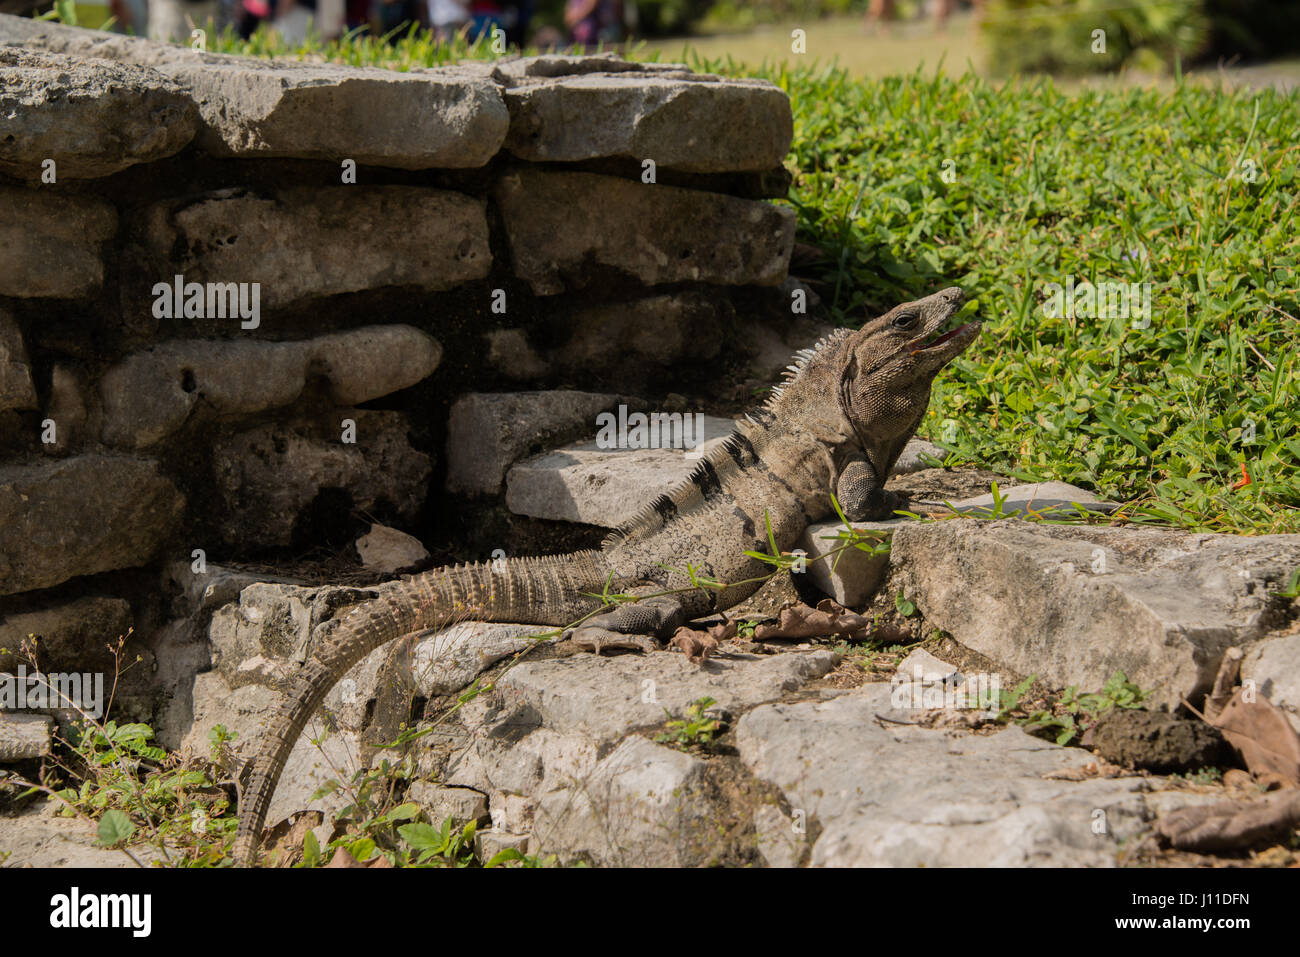 Large striped iguana with long tail on Tulum Ruins in Mexico Stock Photo